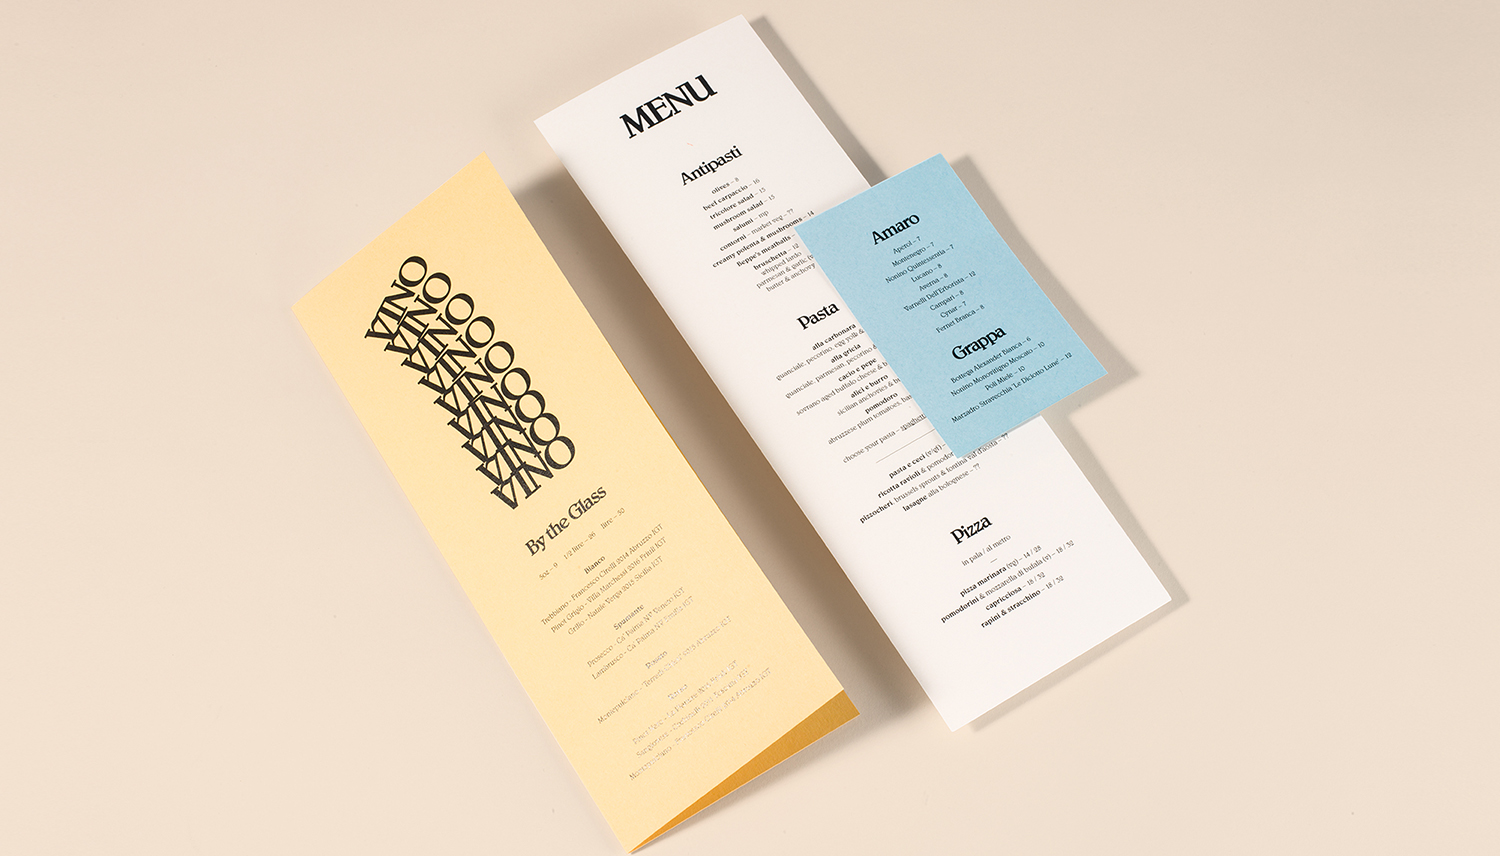 Brand identity and menu design by Glasfurd & Walker for Italian care and restaurant Di Beppe